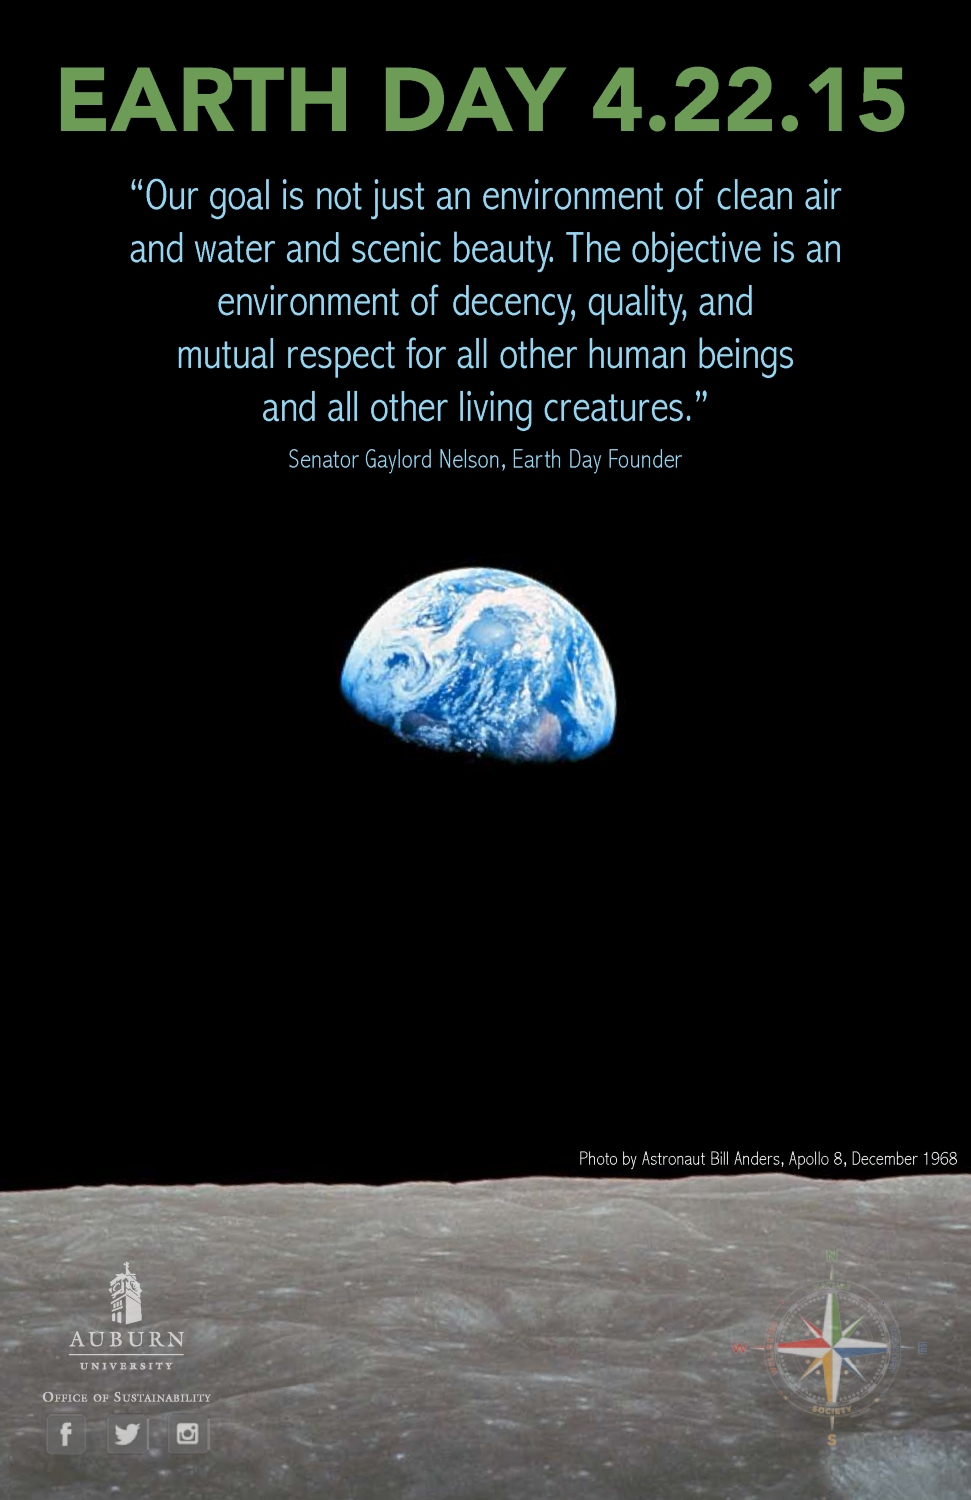 Graphic with Gaylord Nelson quote: "Our goal is not just an environment of clean air and water and scenic beauty. The objective is an environment of decency, quality, and mutual respect for all other human beings and all other living creatures."